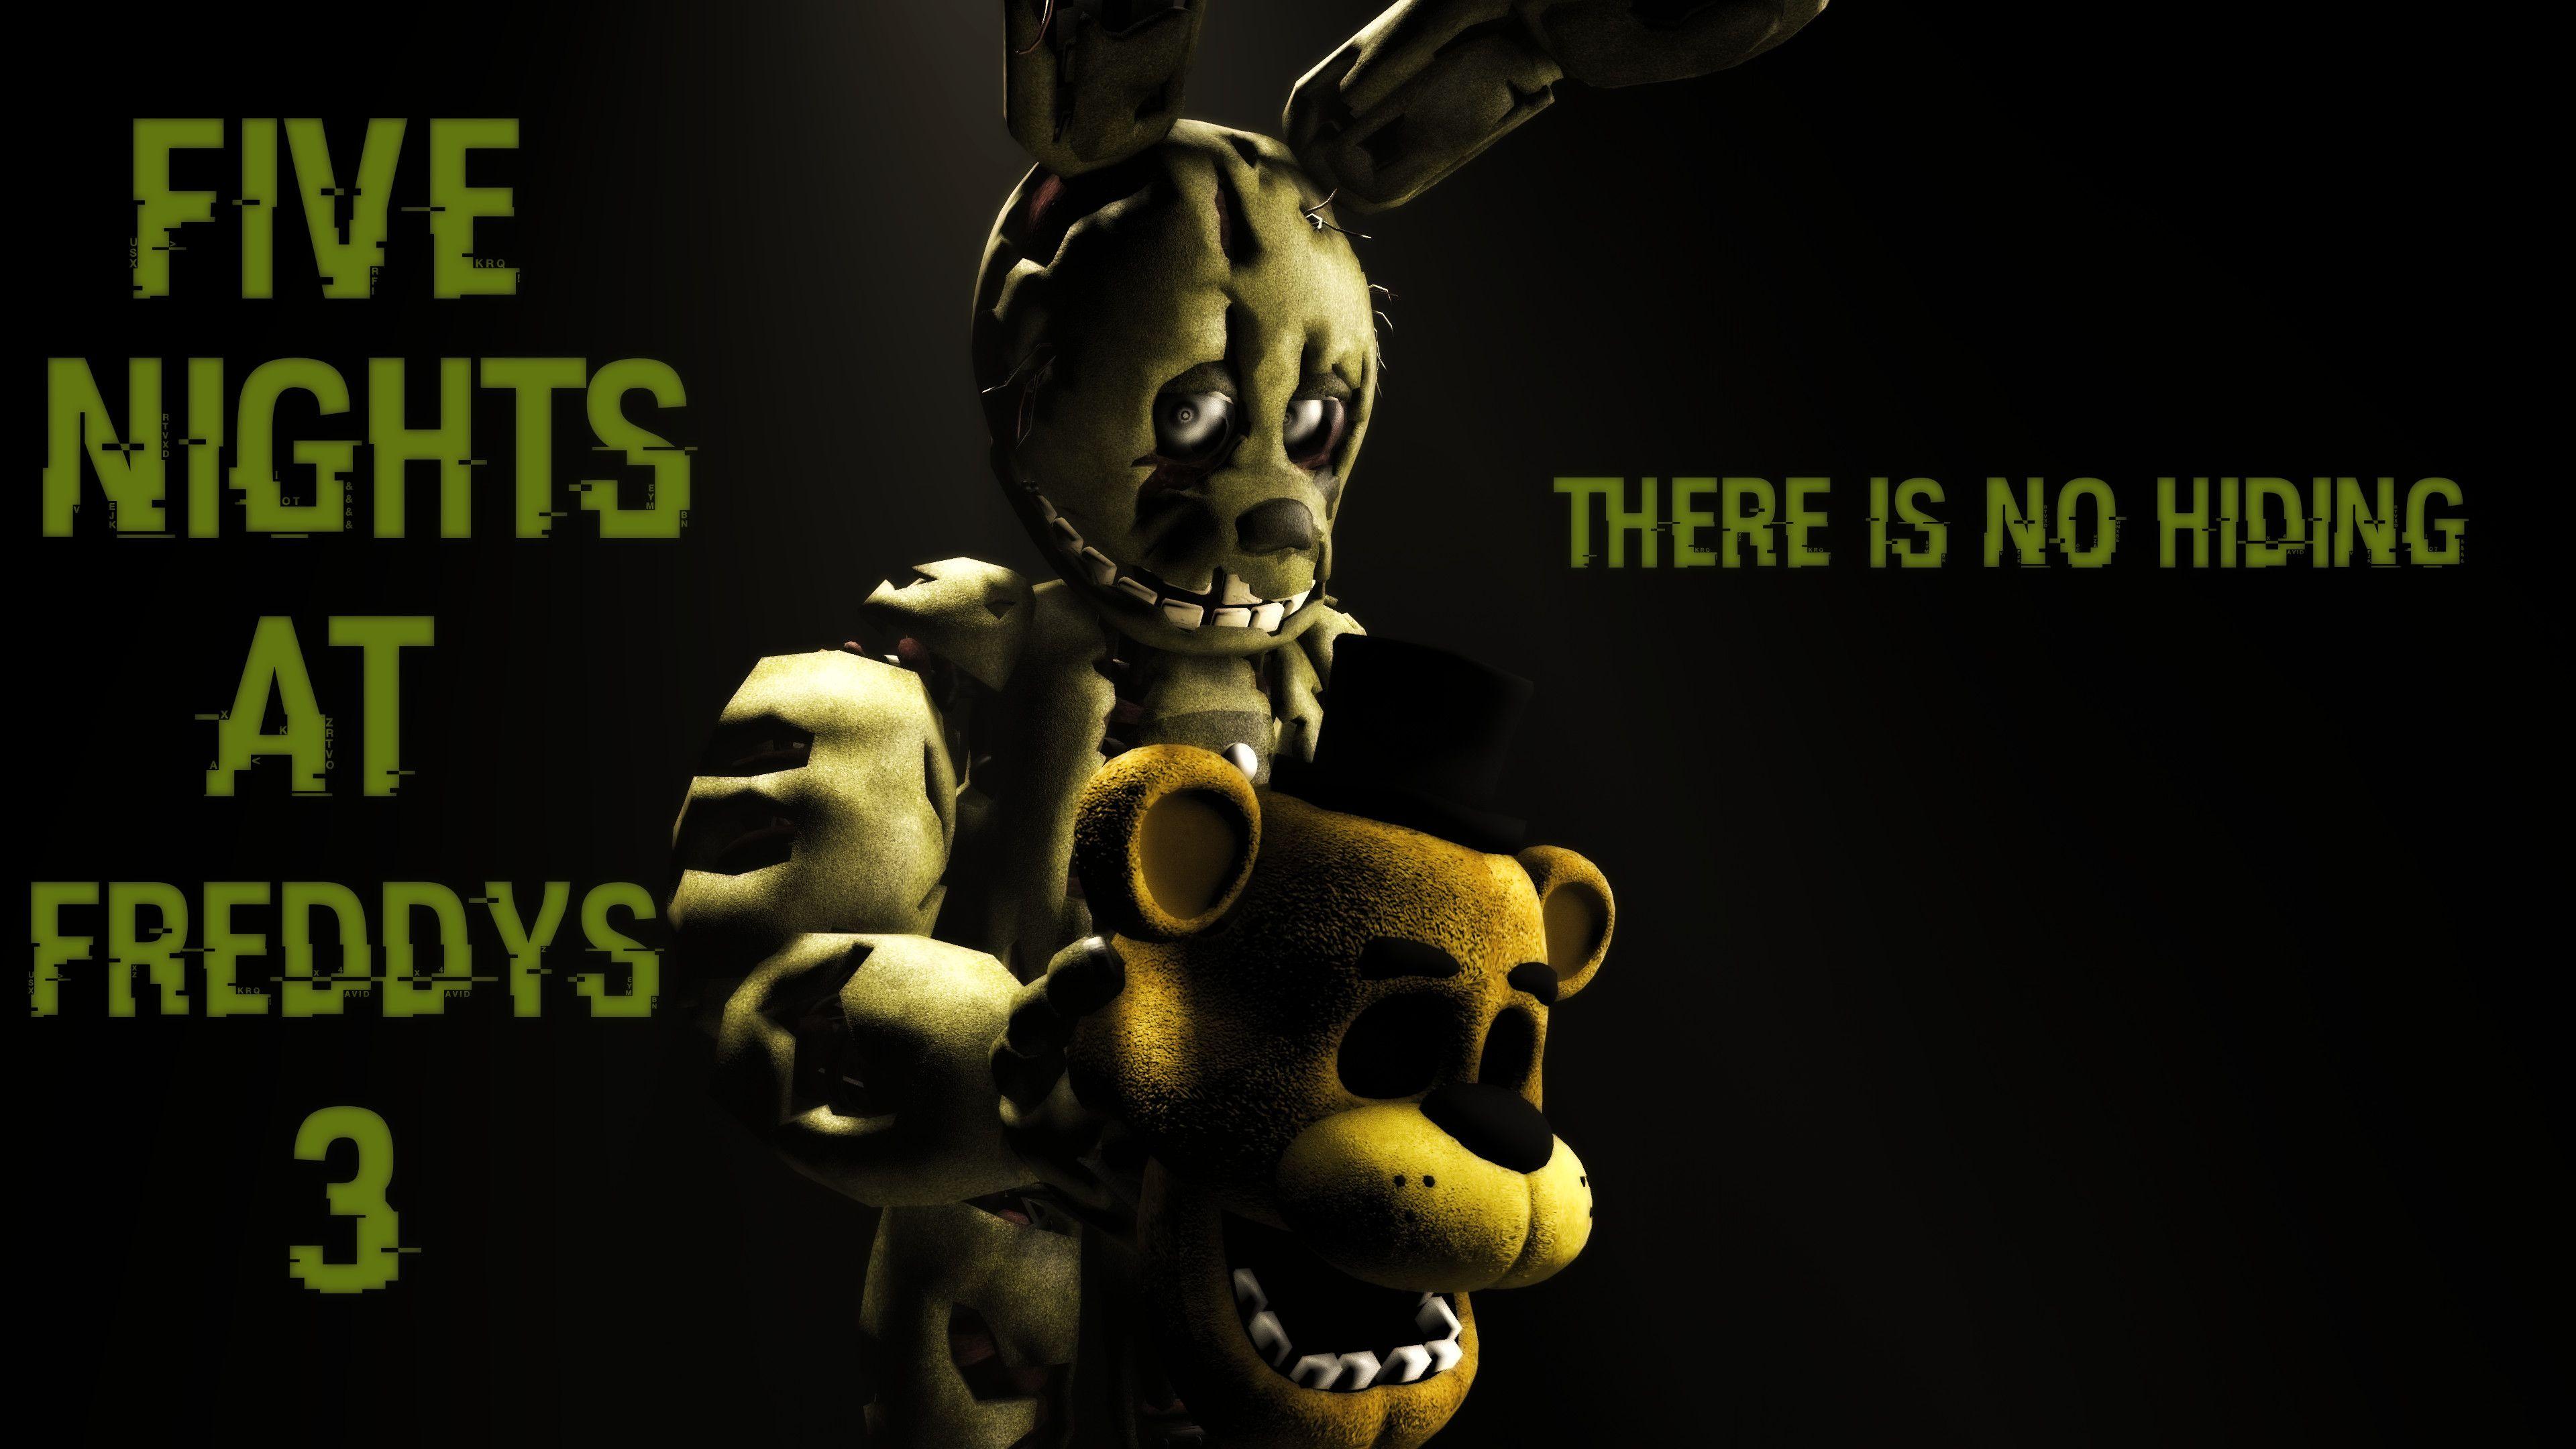 Five Nights At Freddys 3 Wallpapers Wallpaper Cave - 